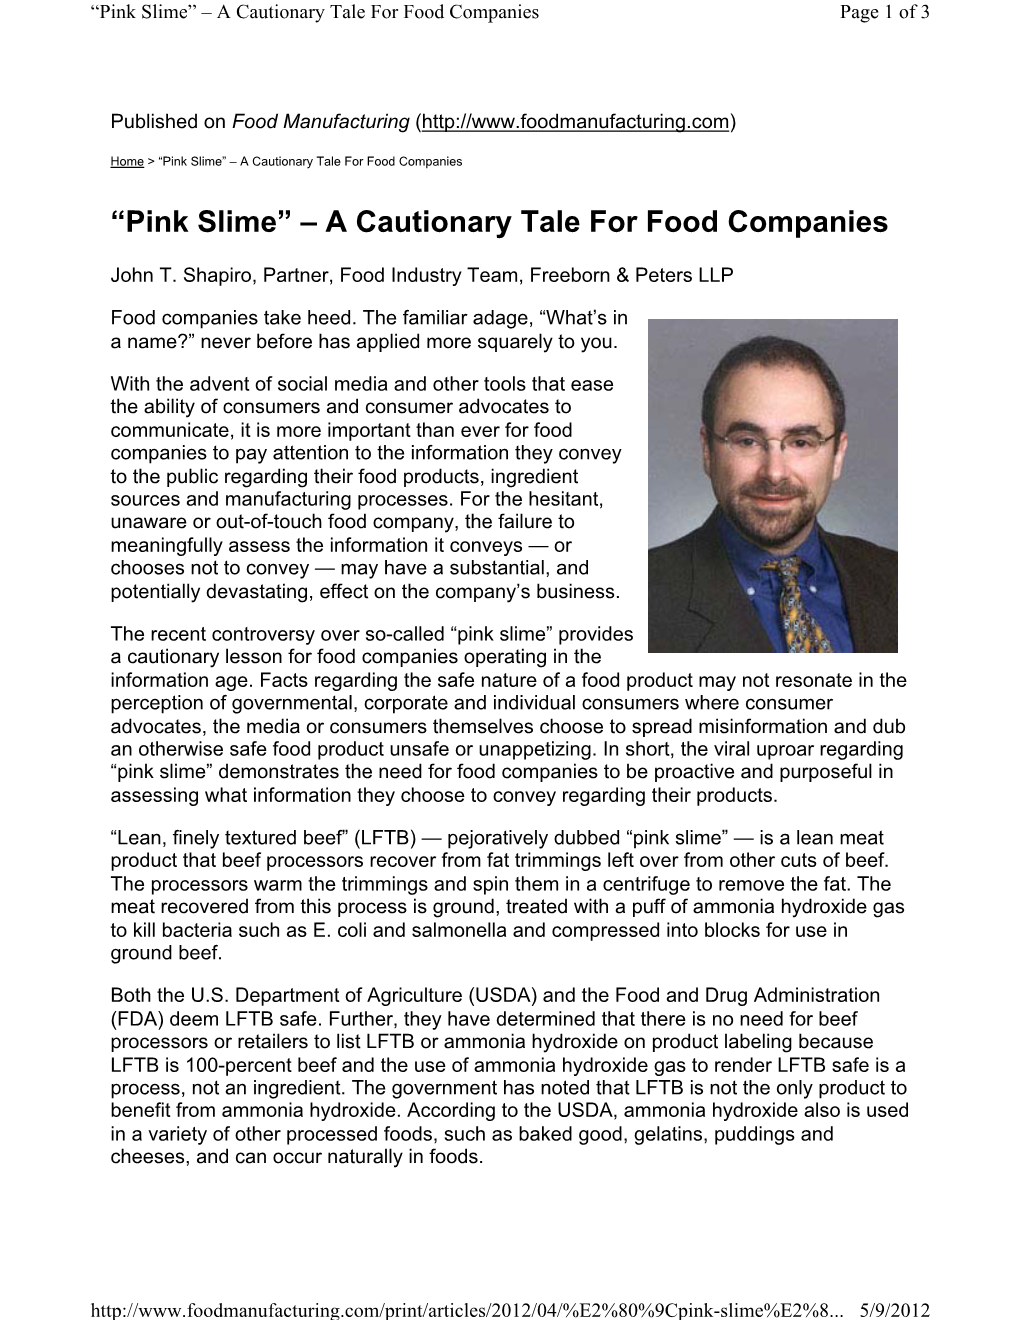 “Pink Slime” – a Cautionary Tale for Food Companies Page 1 of 3